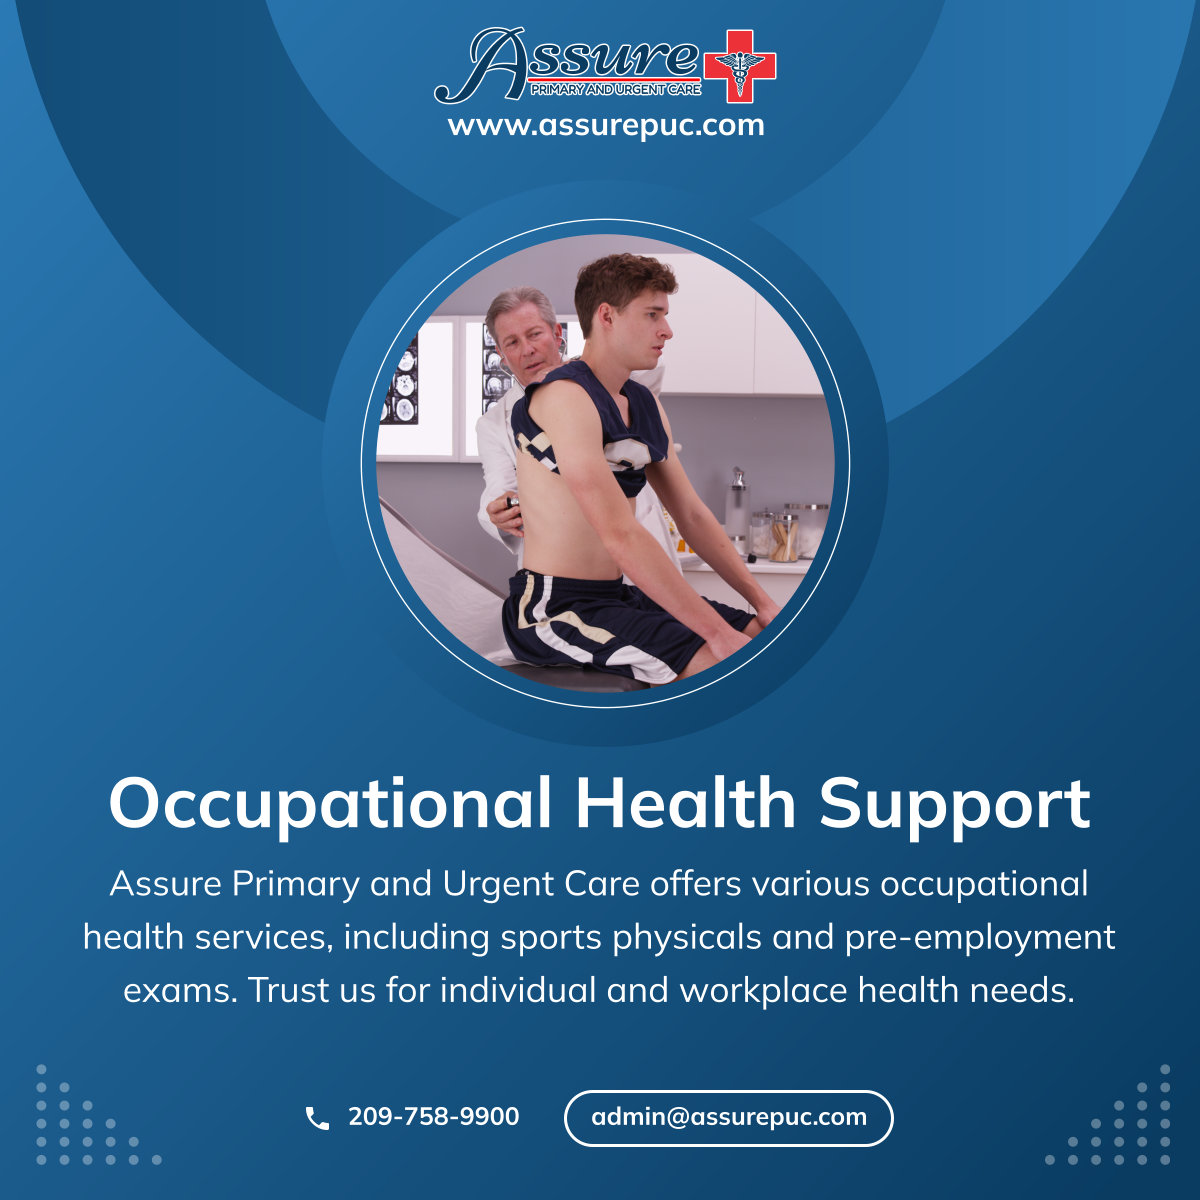 Stay healthy at work with our occupational health services. From sports physicals to pre-employment exams, Assure Primary and Urgent Care has you covered. 

#MountainHouseCA #MedicalServices #OccupationalHealth